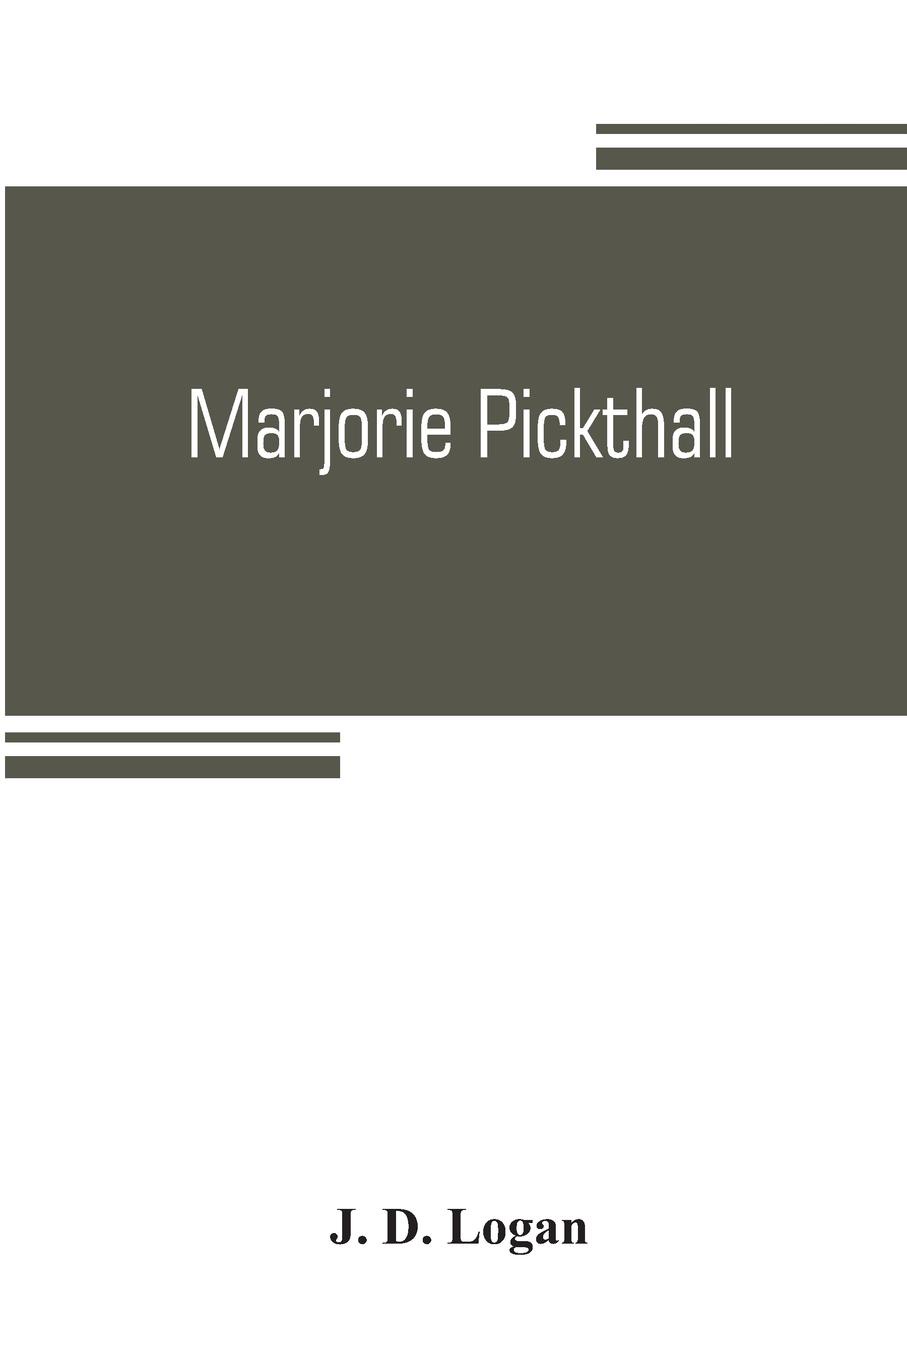 Marjorie Pickthall. her poetic genius and art. An appreciation and an analysis of aesthetic paradox